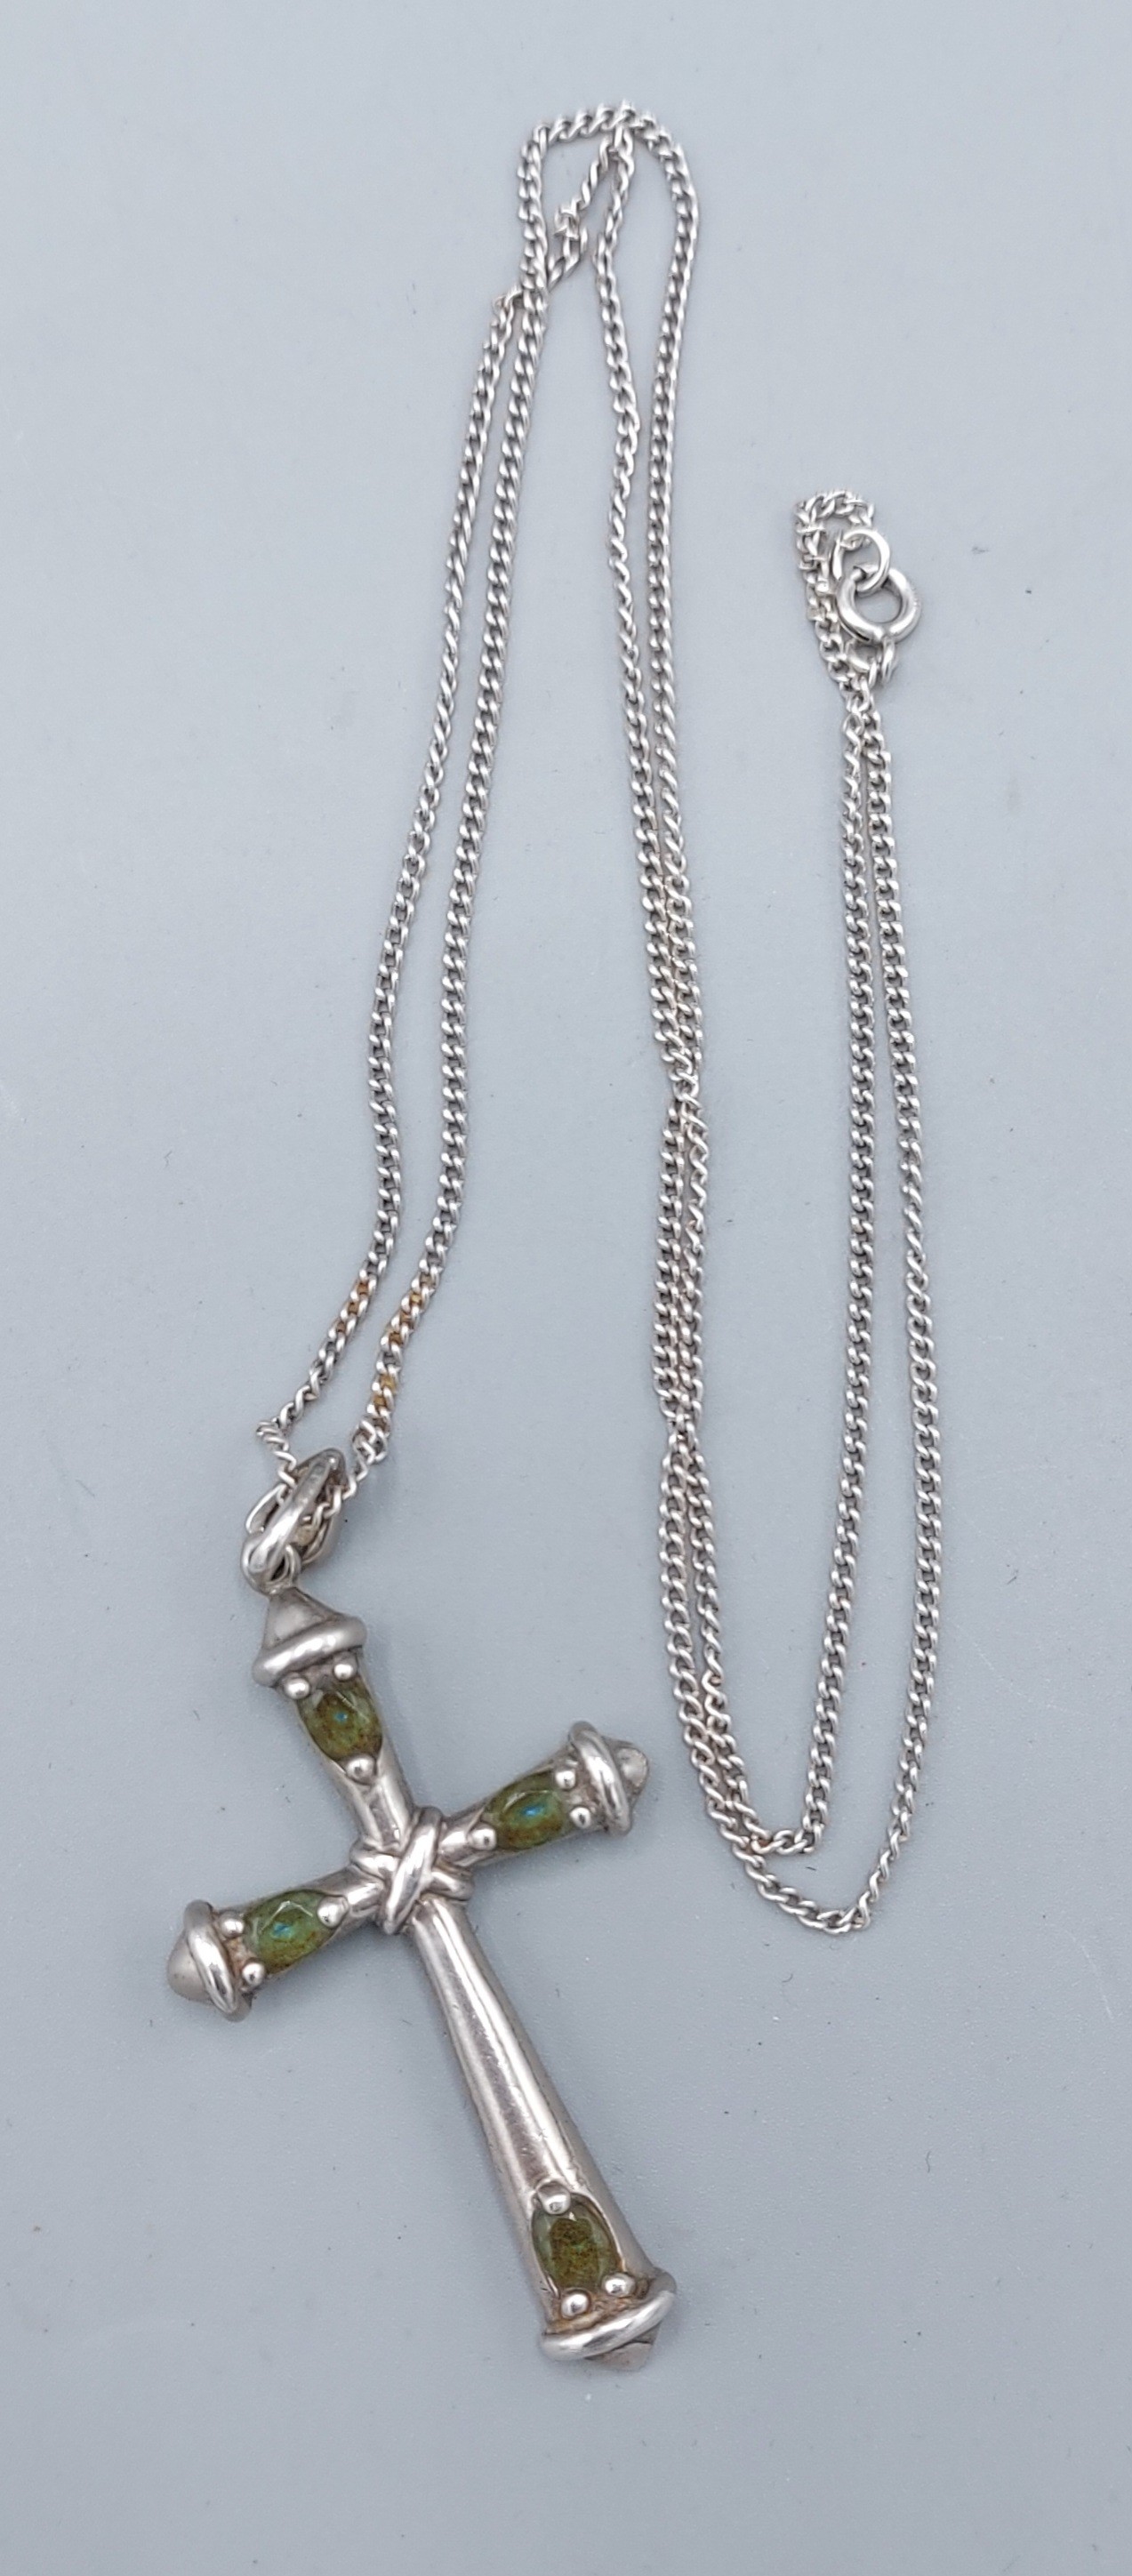 A Sterling silver crucifix pendant set with green stones together with a linked chain